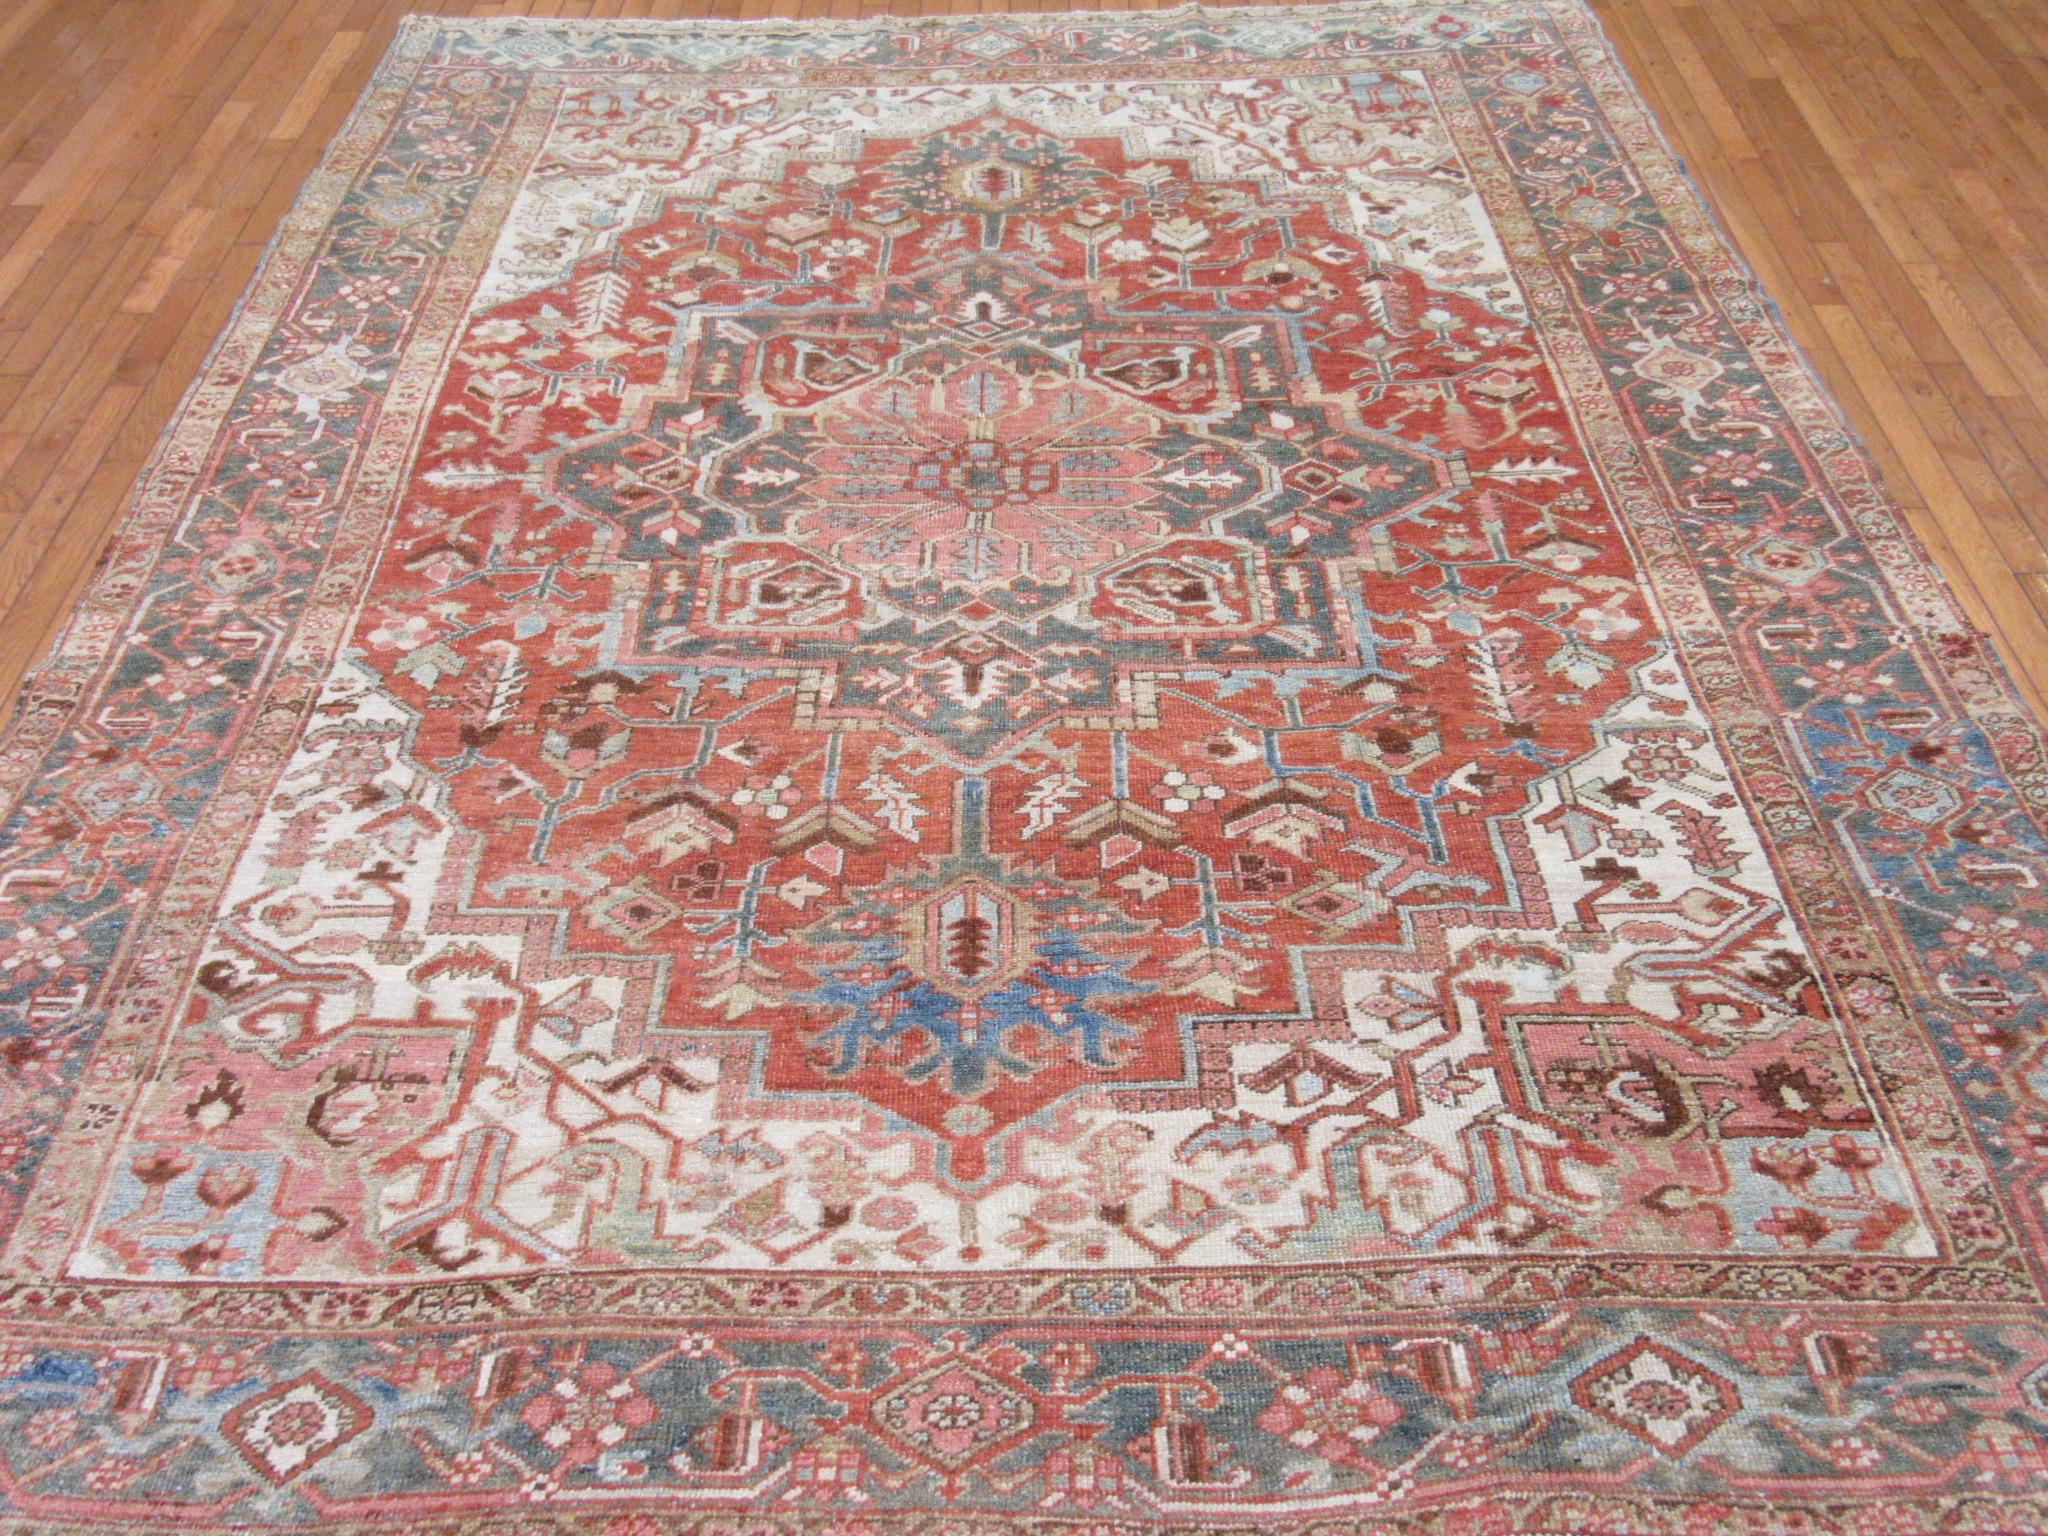 This is an antique hand-knotted Persian Heriz rug. It is made with wool on a cotton foundation. The rug has all naturals dyes and has been softened out for a mellow look for easy placement in your home or office. The rug measures 7' 6'' x 9' 6'' and